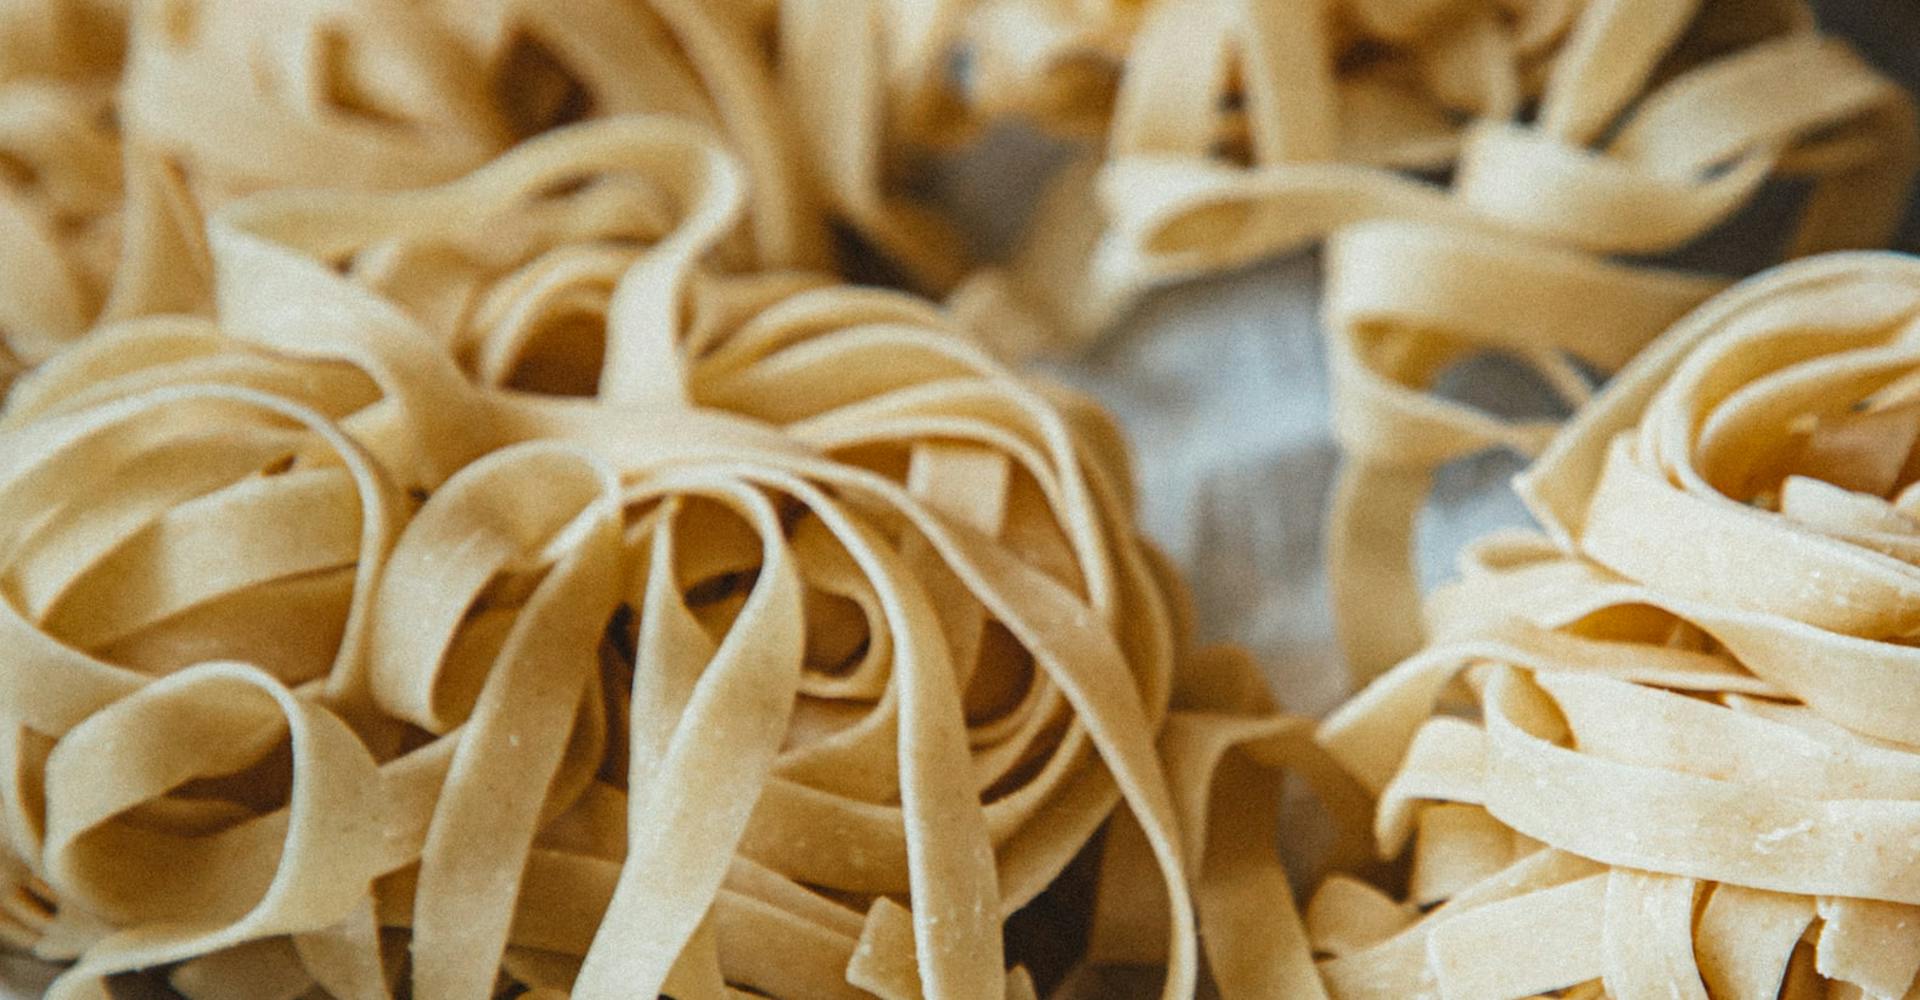 allplants | What Your Favourite Pasta Shape Says About You